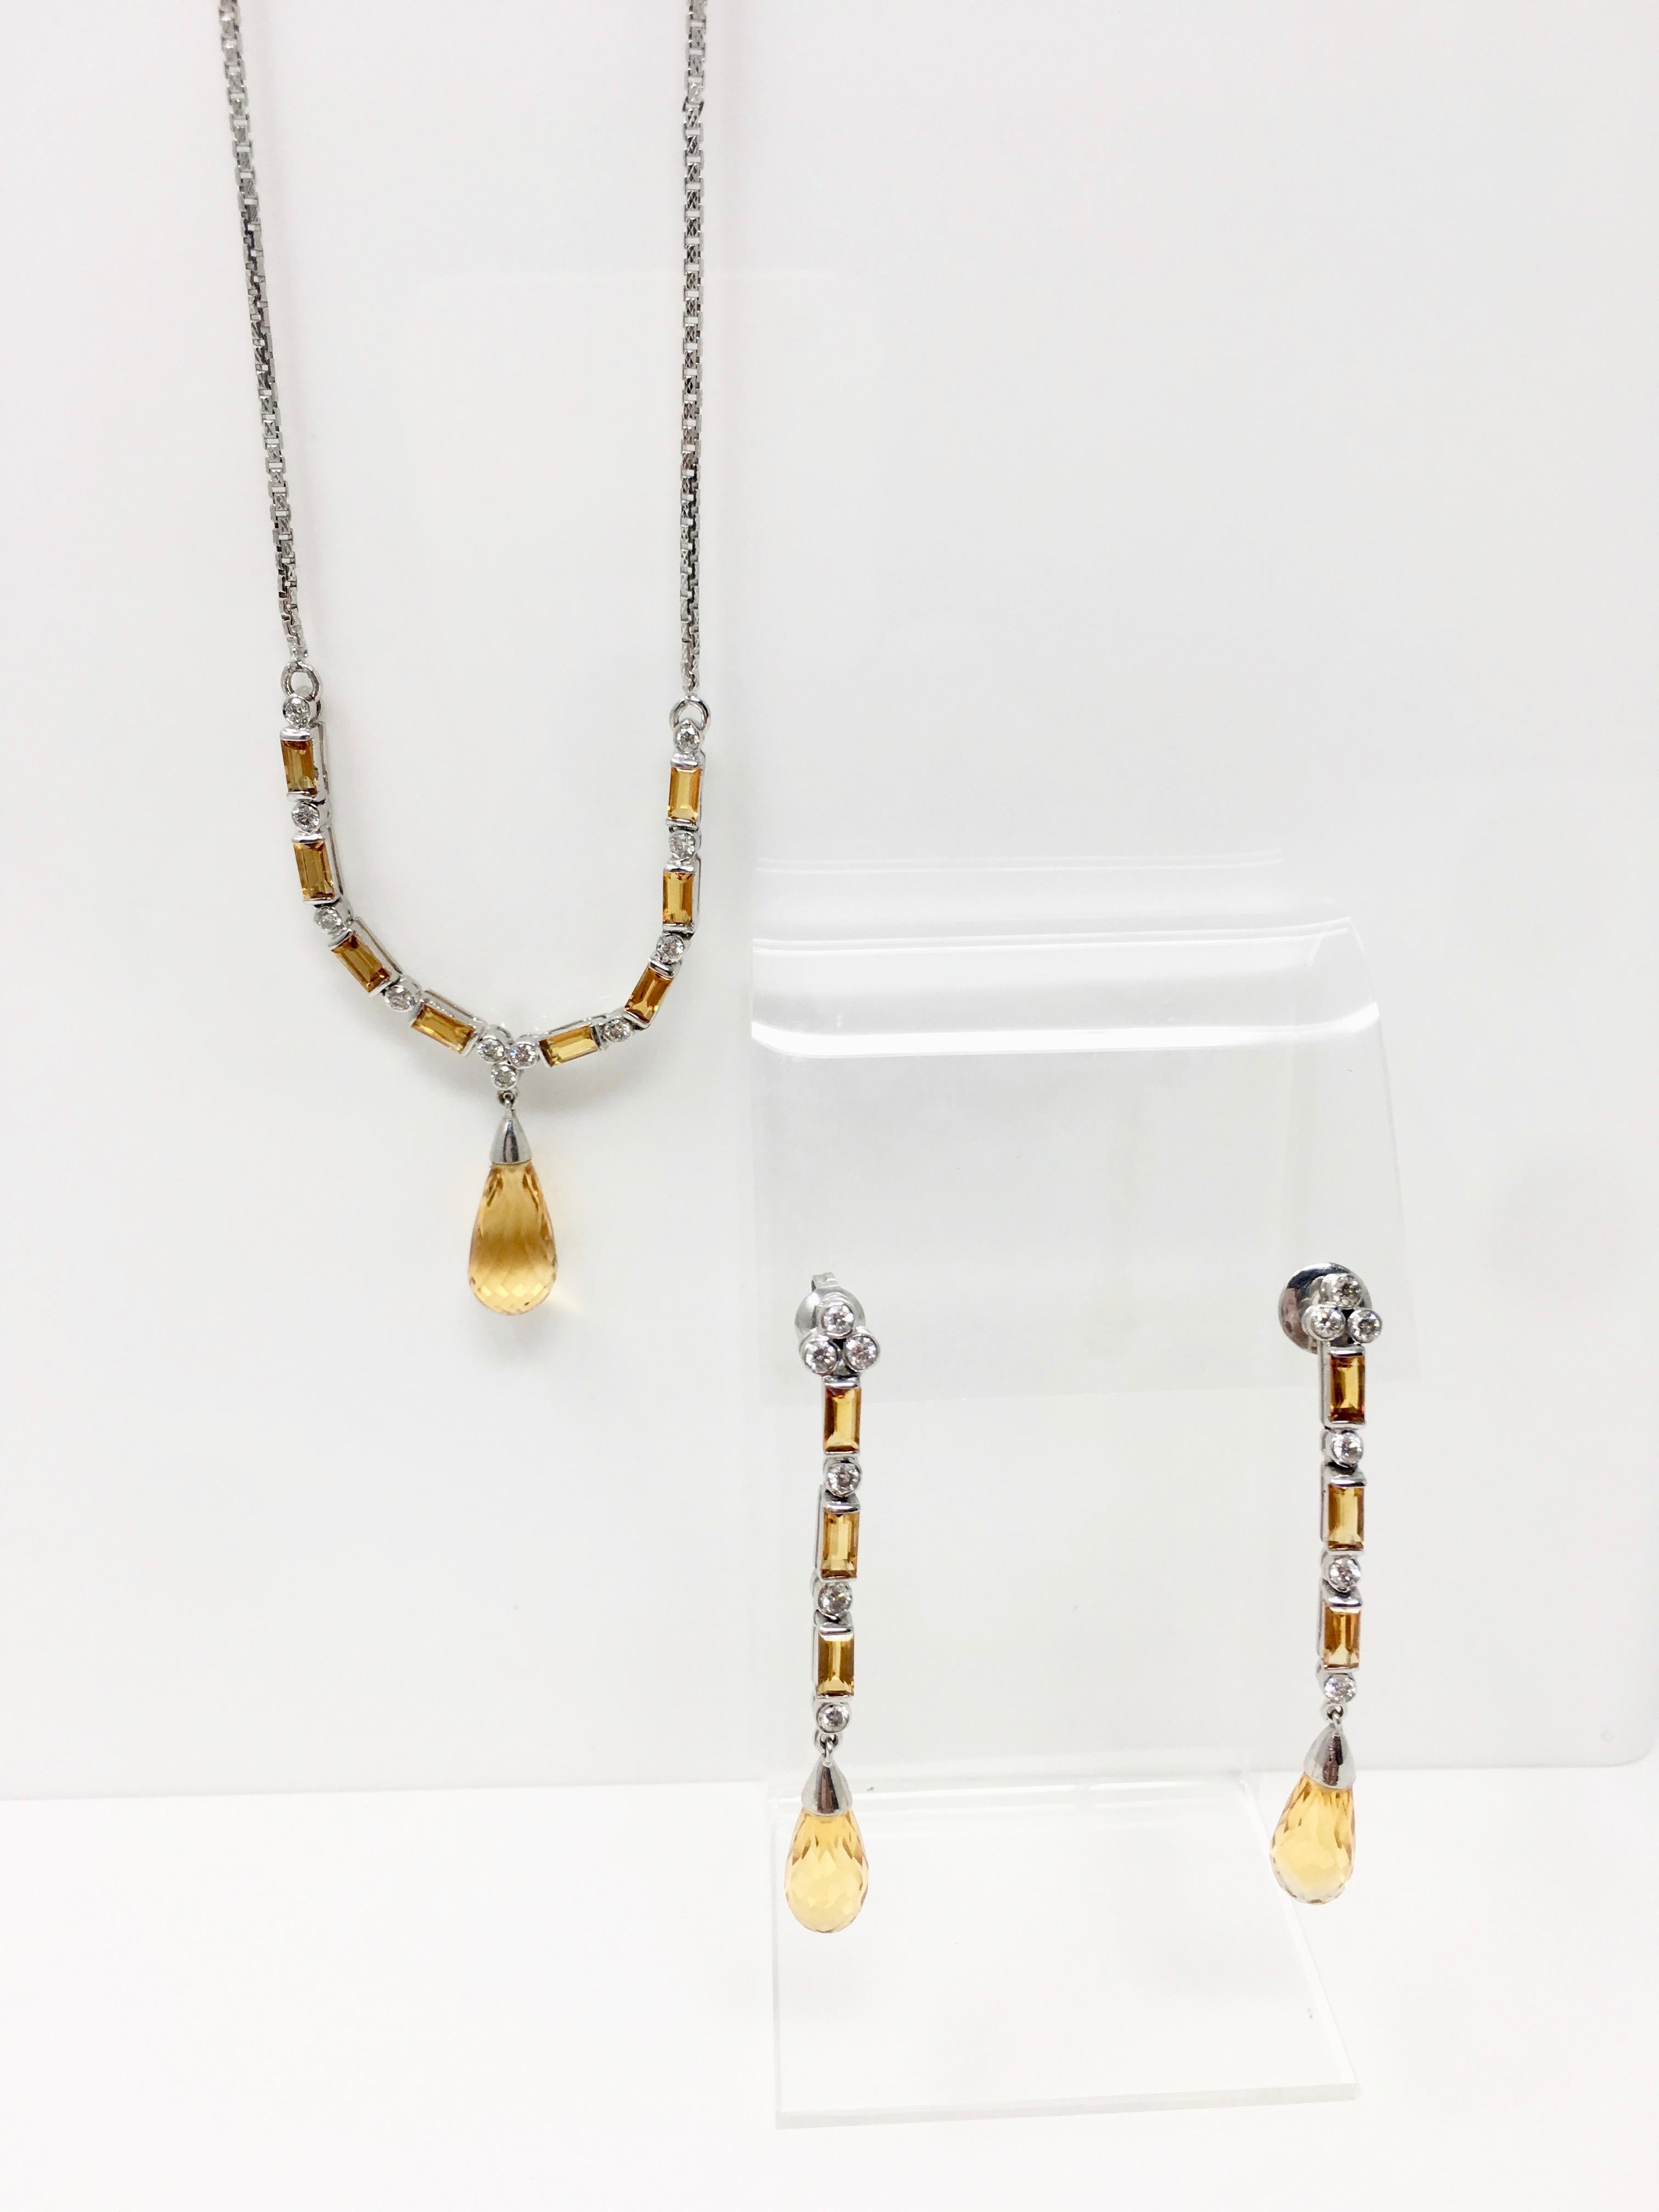 This three piece diamond and topaz pendant set is beautifully hand made in 18k white gold by Moguldiam Inc. This is perfect for daytime or evening wear. The topaz carat weight on the pendant set is 13.5 carat and diamond weight is 3.01 carat with VS